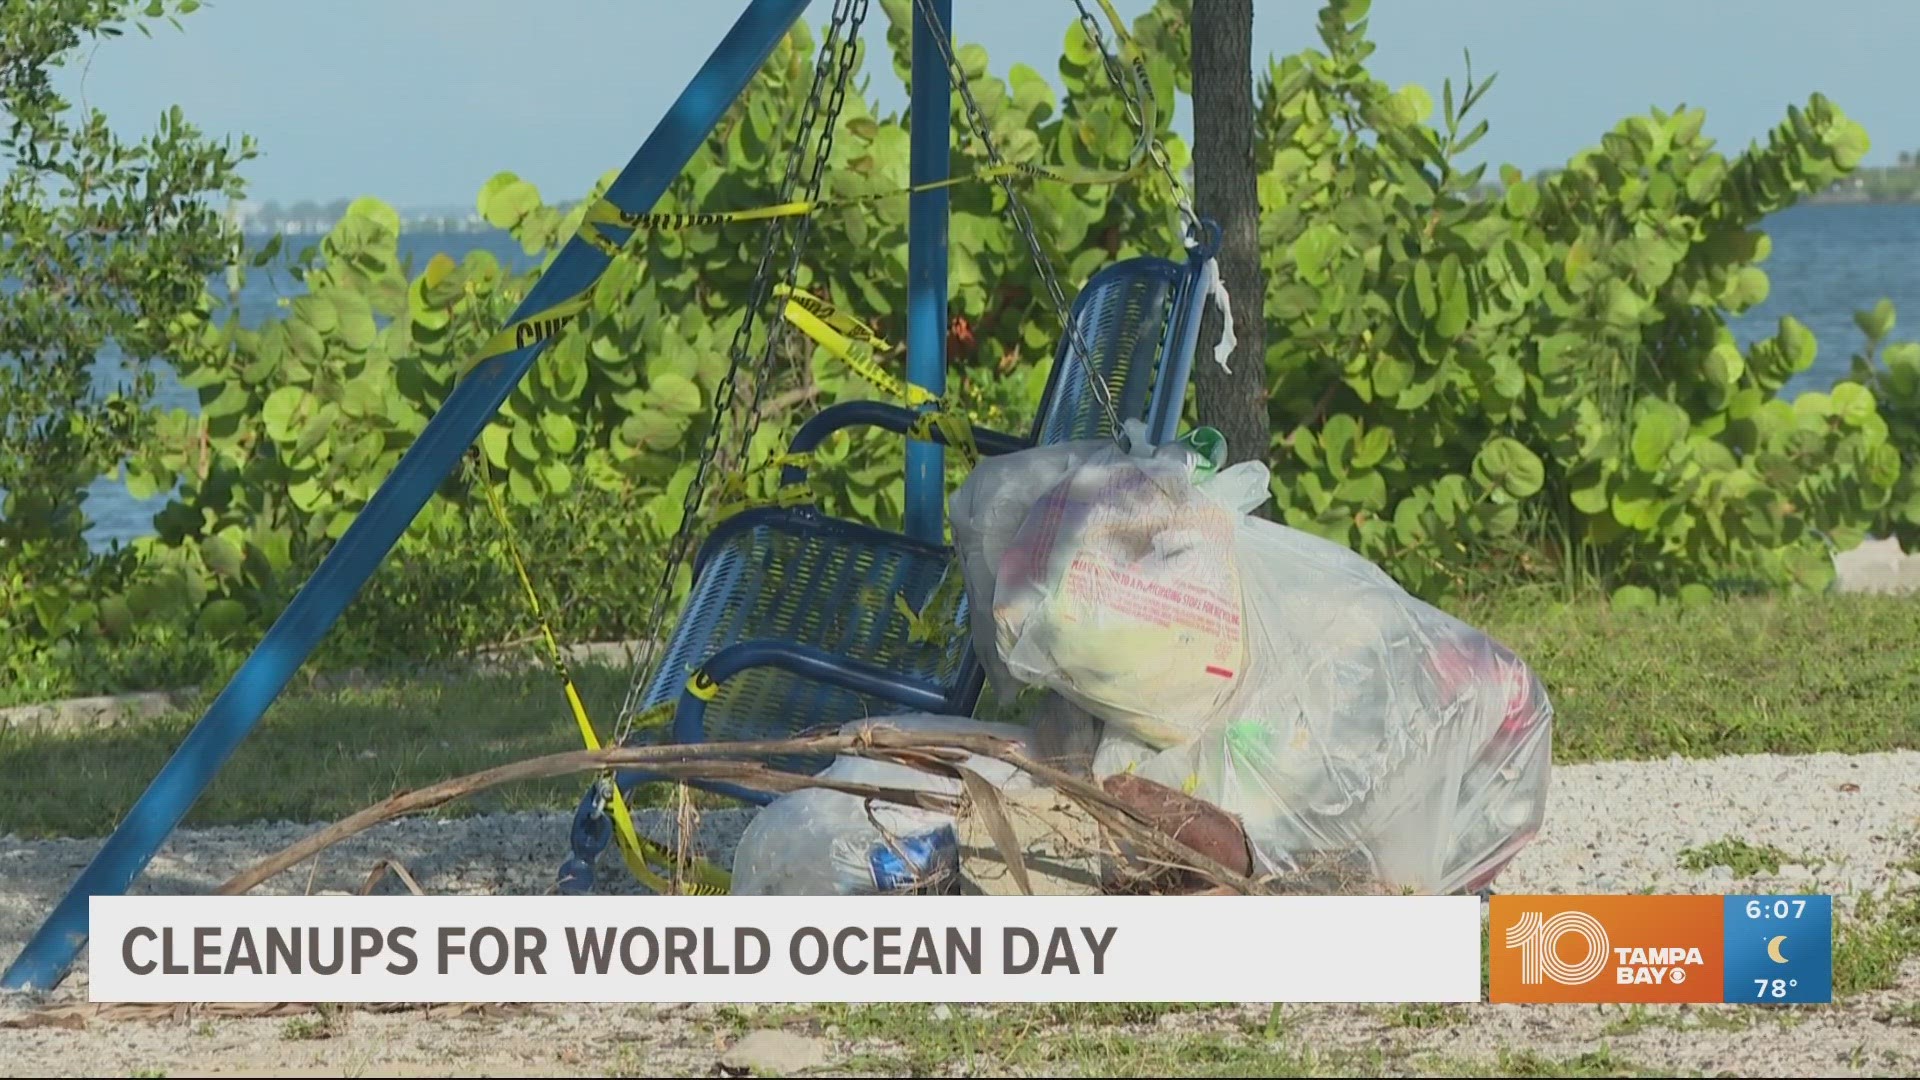 One cleanup with be held at Tradewinds Island Grand Resort